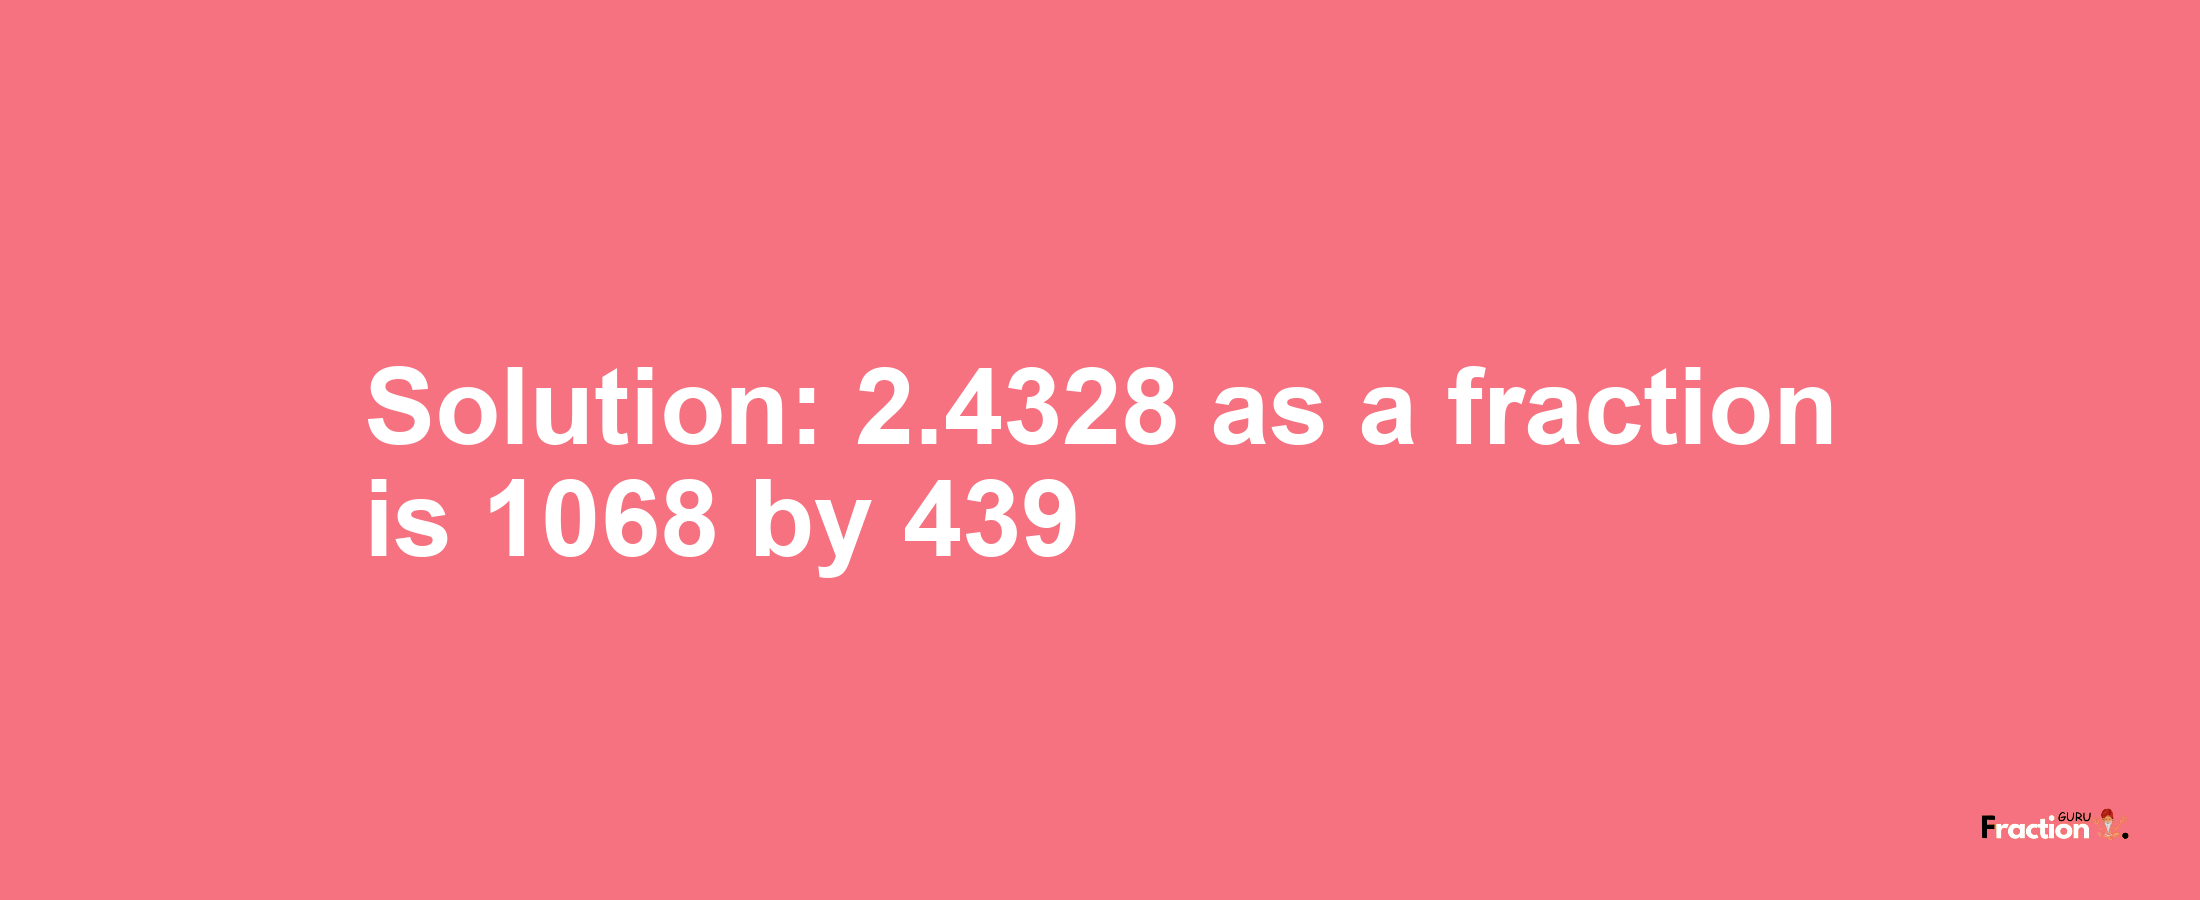 Solution:2.4328 as a fraction is 1068/439